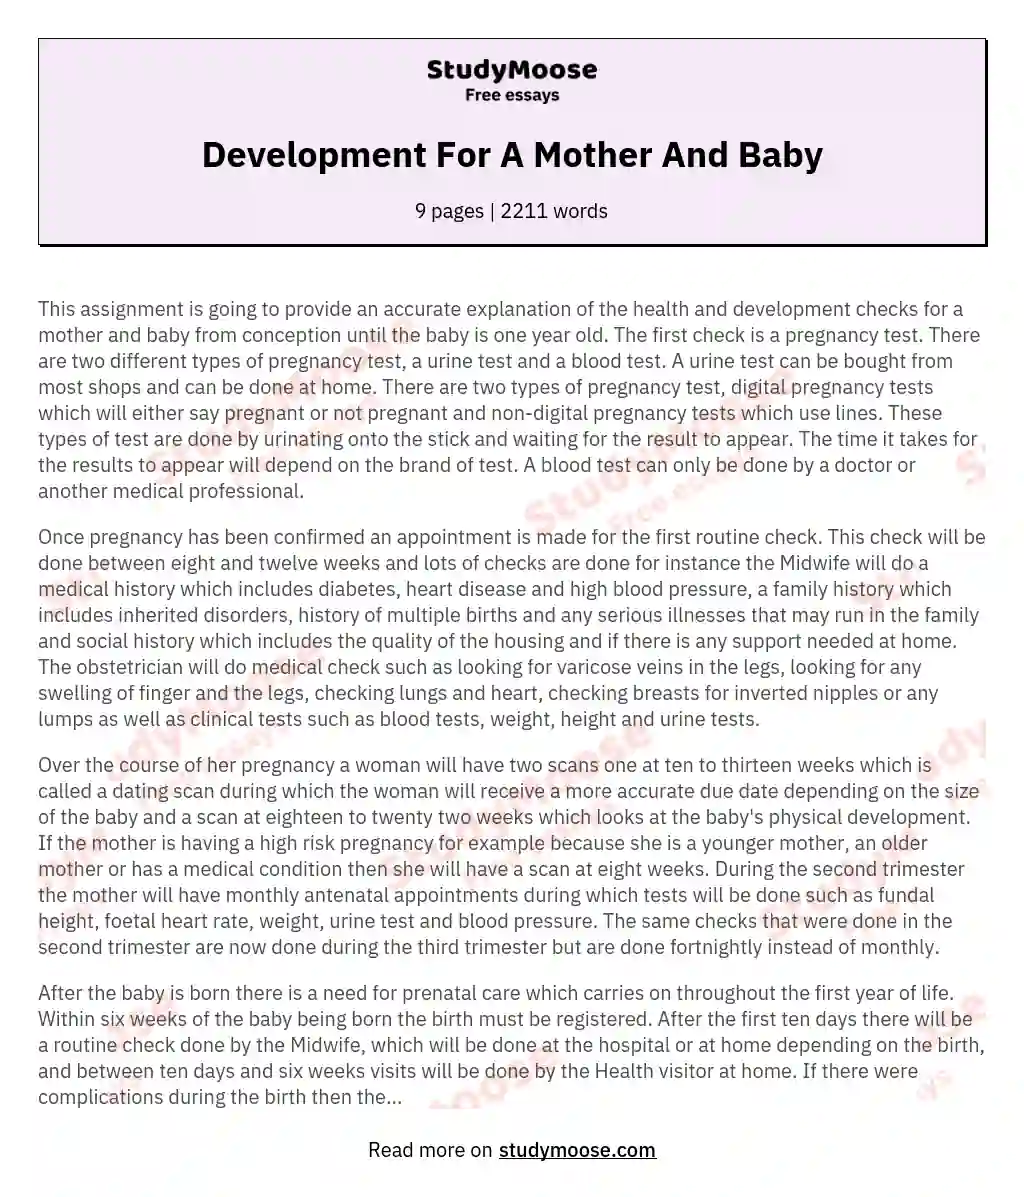 Development For A Mother And Baby essay